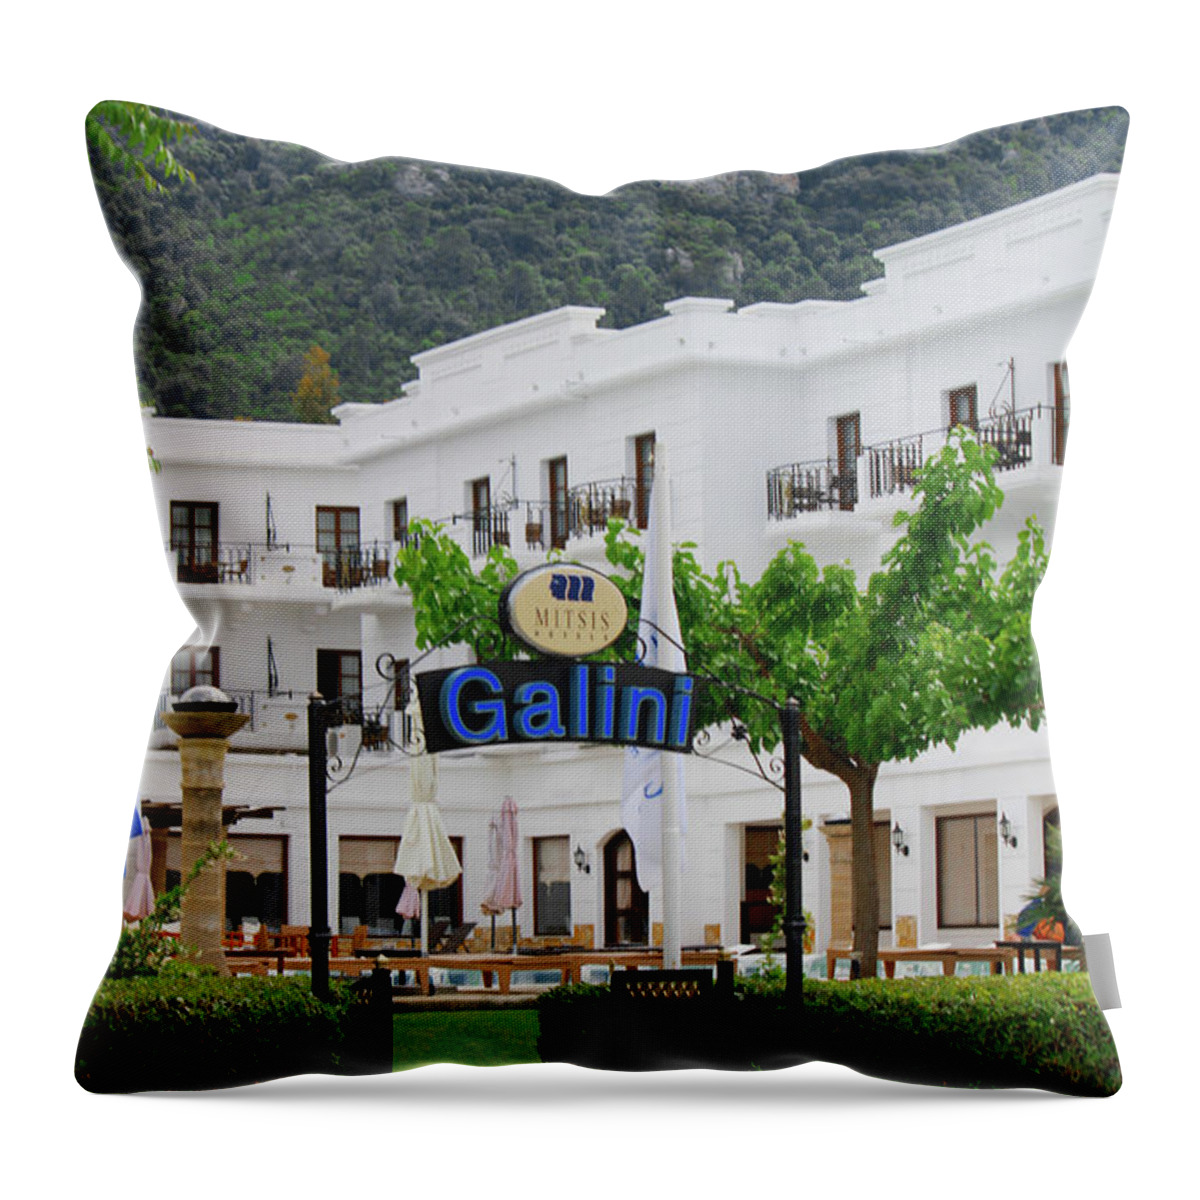 Galini Throw Pillow featuring the photograph Galini Hotel by Donna L Munro